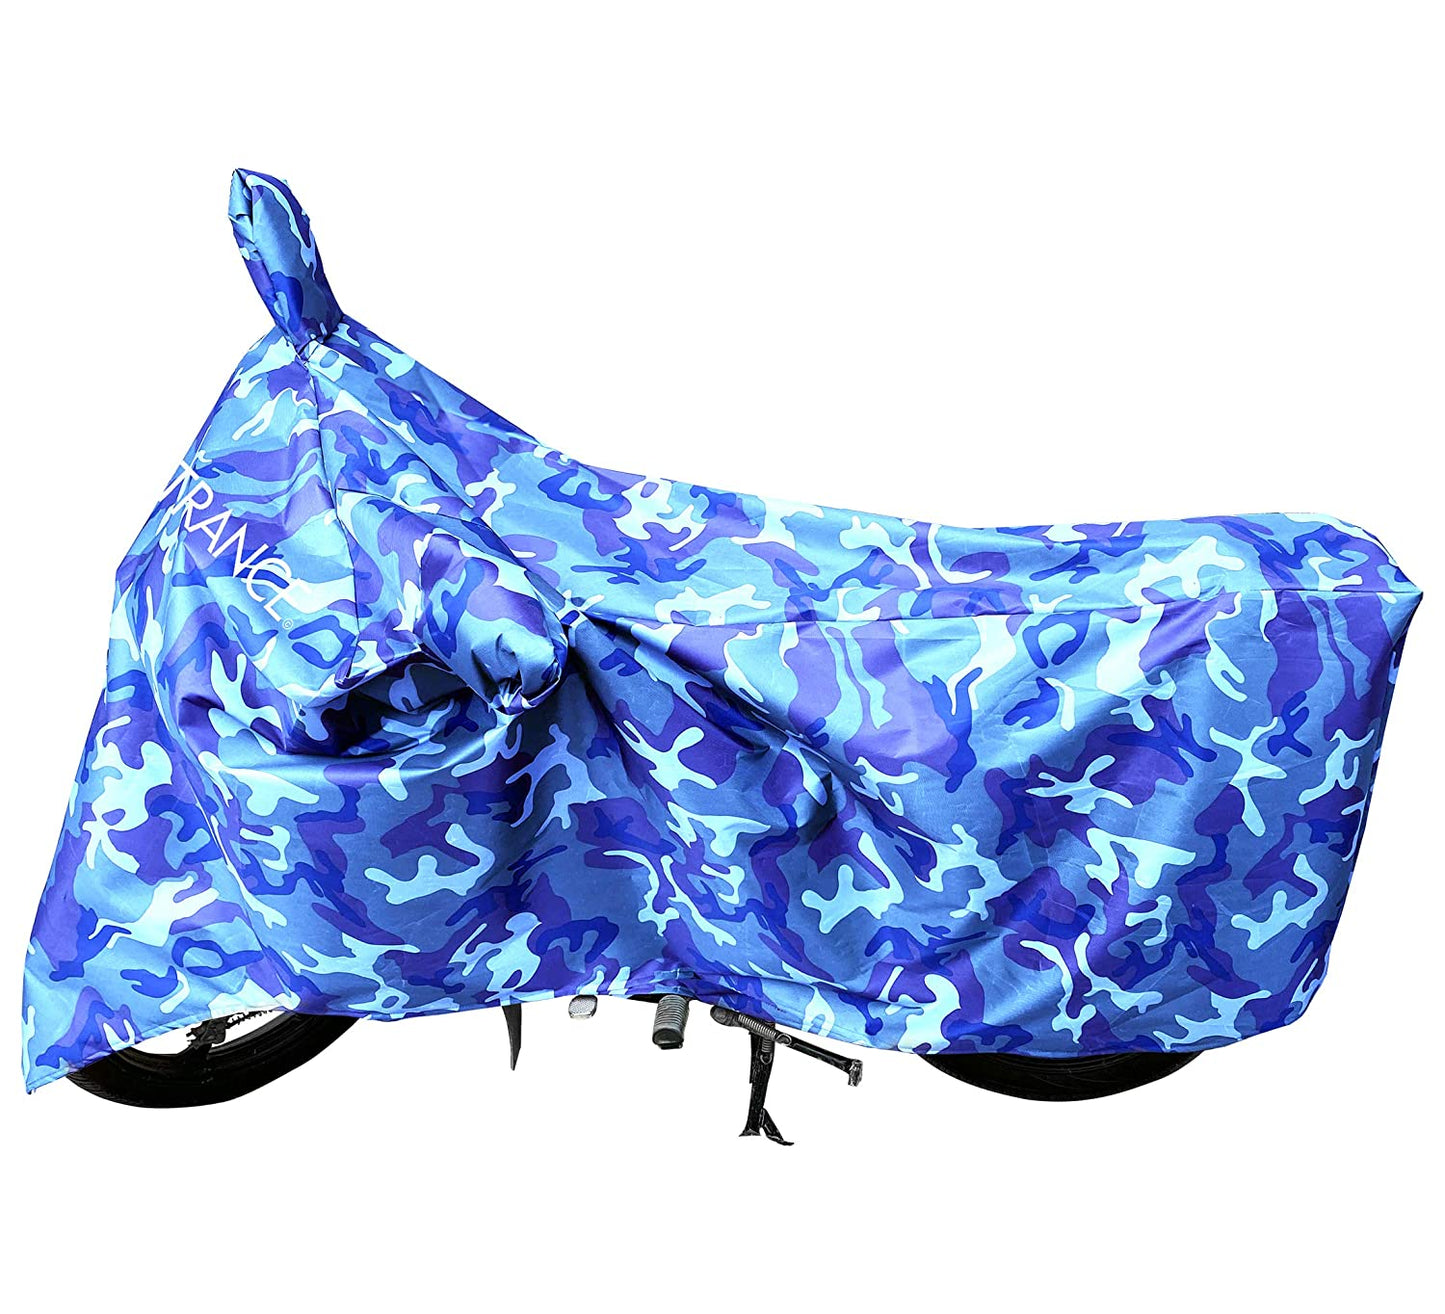 MotoTrance Jungle Bike Body Covers For Hero Splendor Plus - Interlock-Stitched Waterproof and Heat Resistant with Mirror Pockets